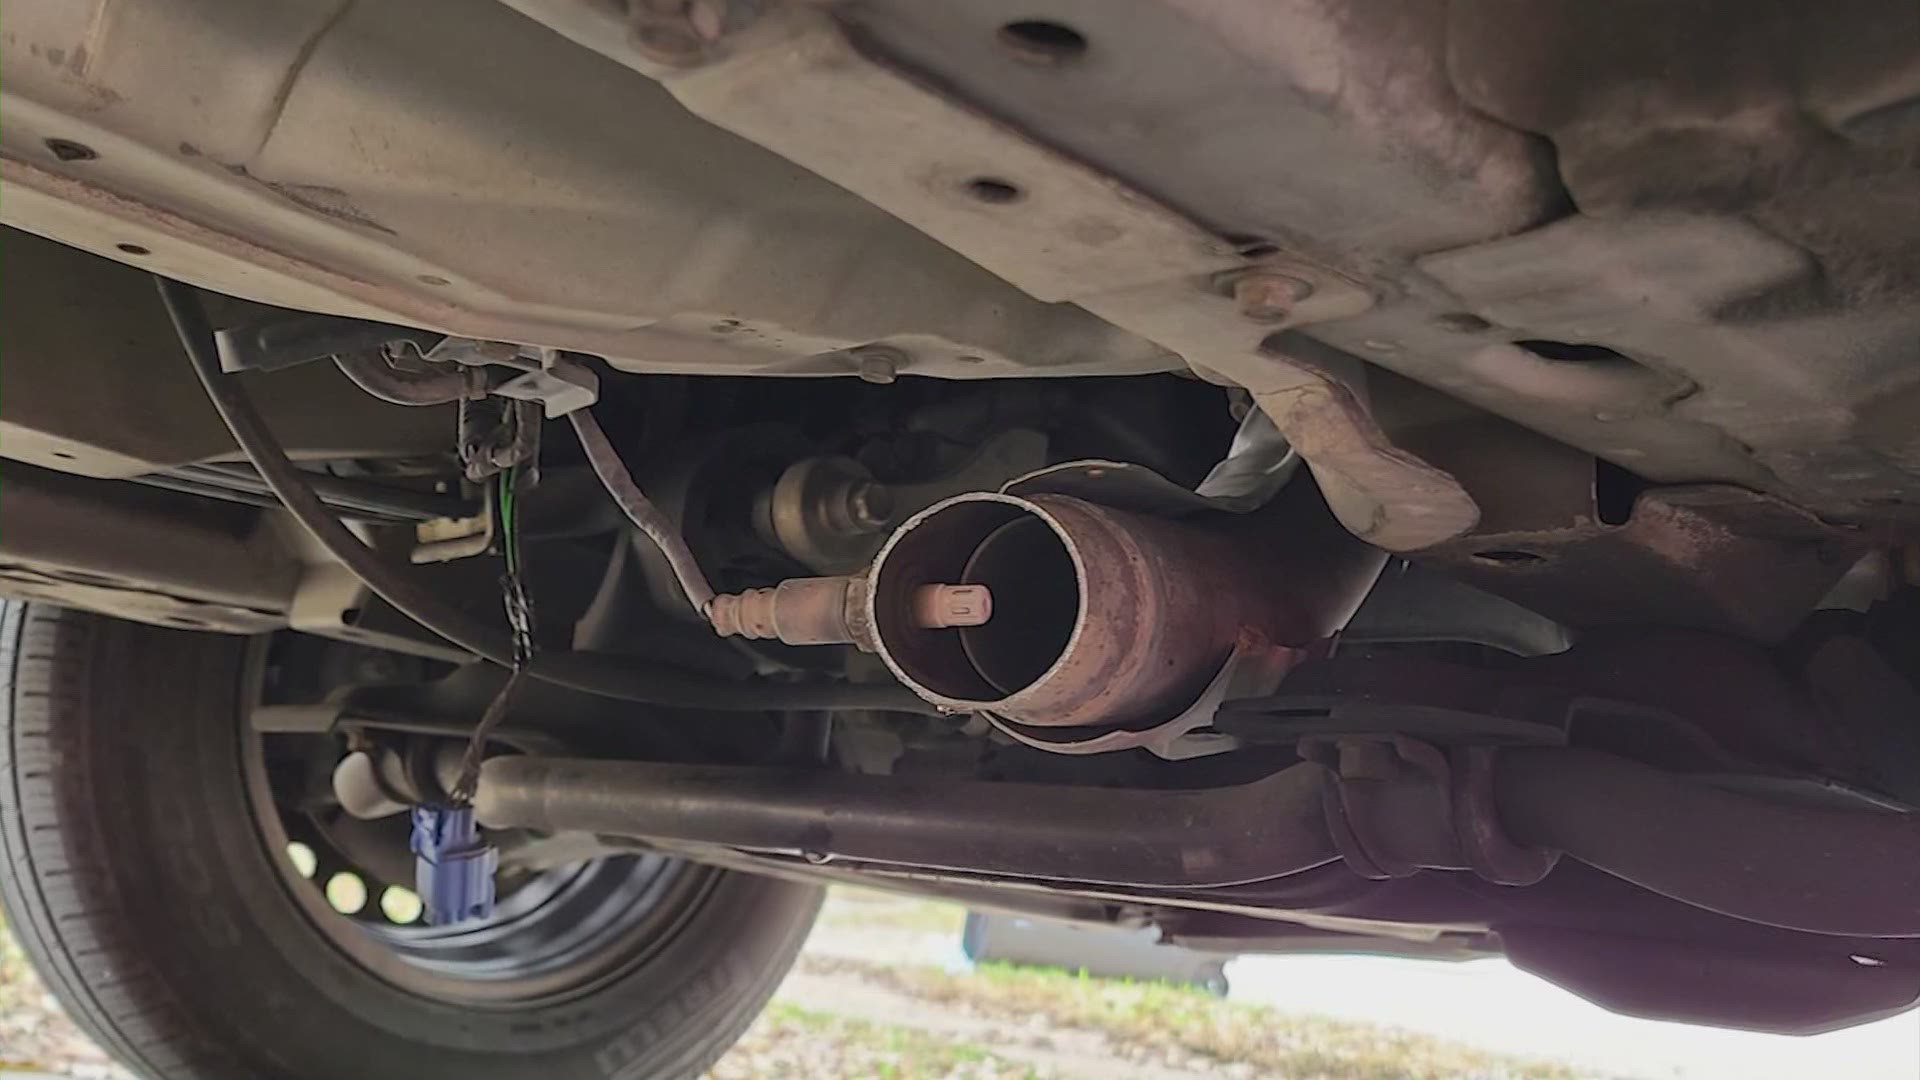 Sgt. Jesse Fite recommends spraying your whole catalytic converter, end to end, with bright, high-temperature paint.